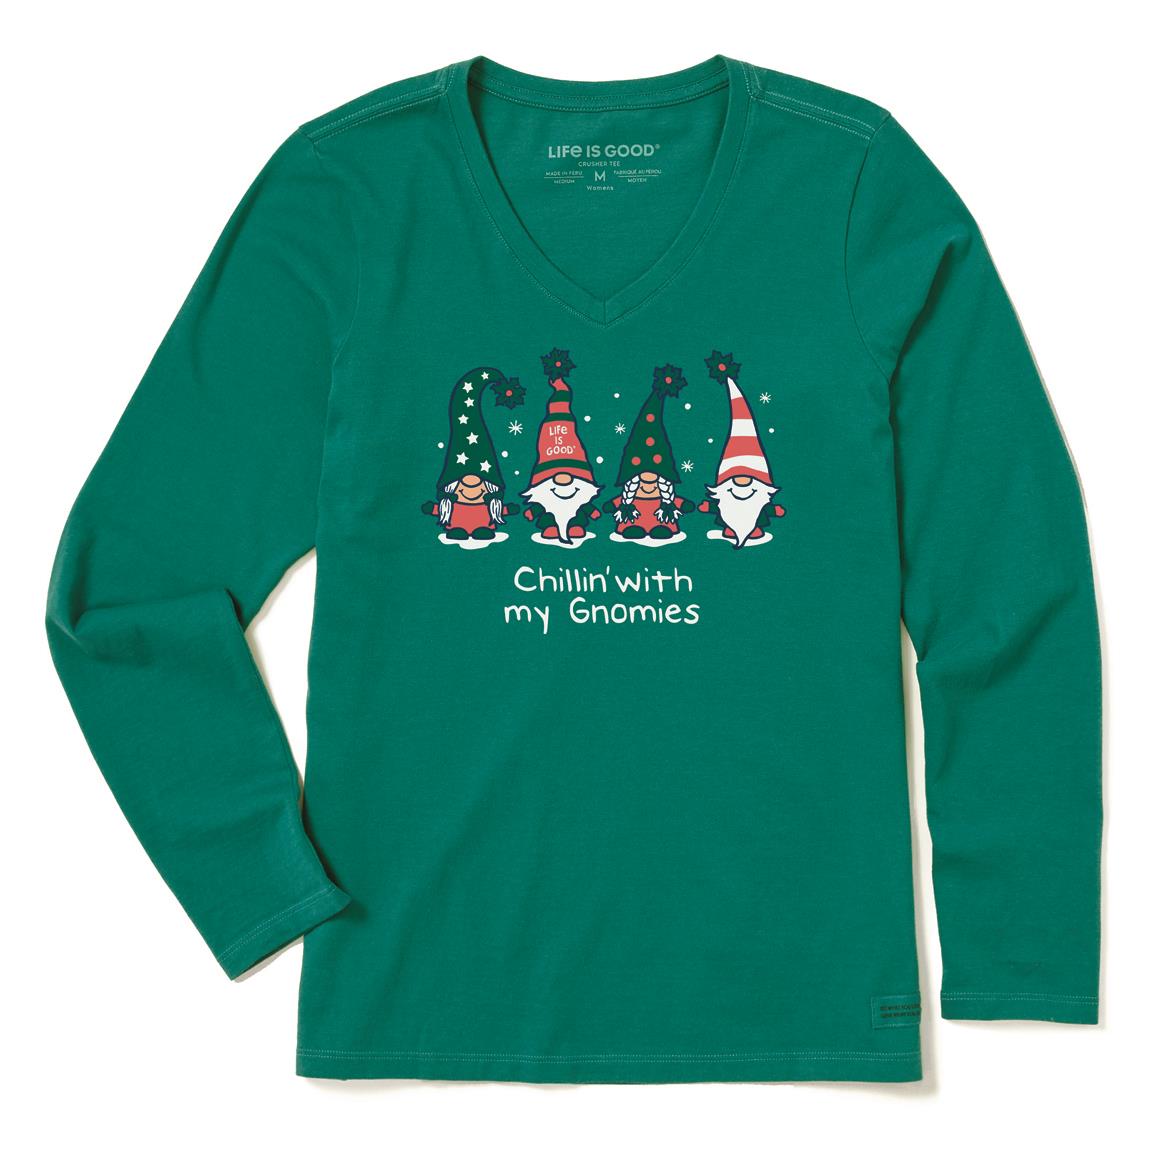 Life Is Good Women's Chillin' With My Gnomes Family Crusher Vee Shirt, Spruce Green